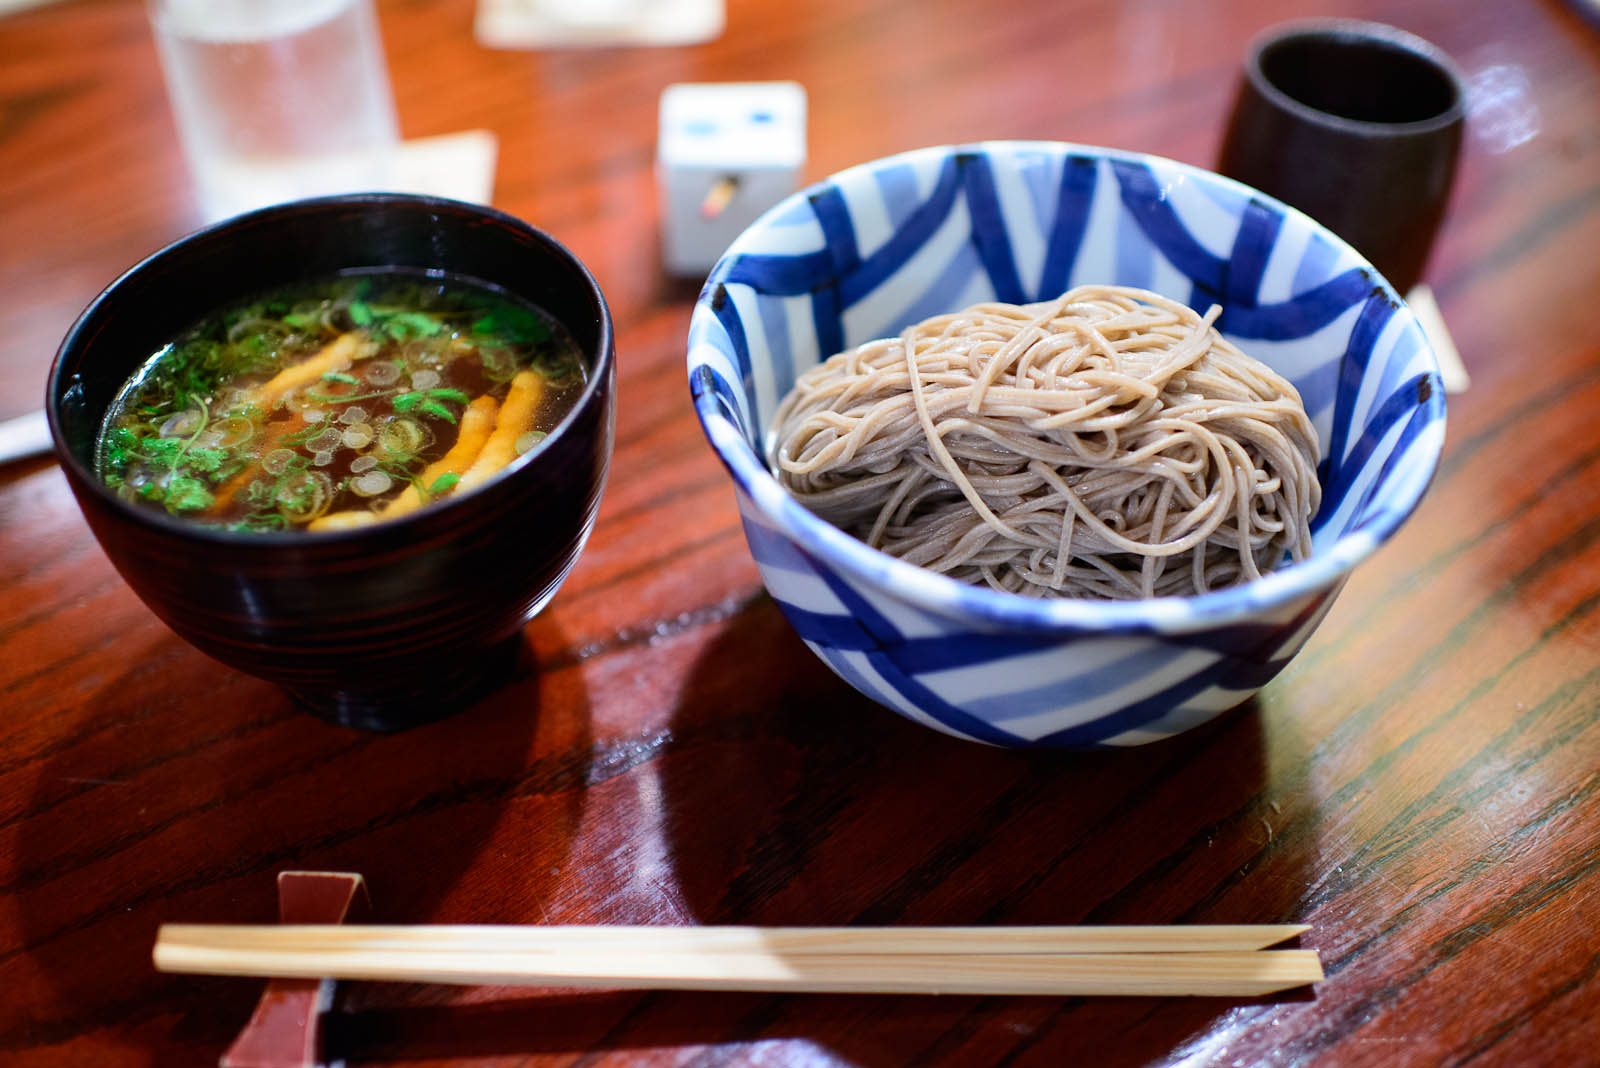 Kamo tsuki soba - chilled buckwheat noodles with hot duck dippin